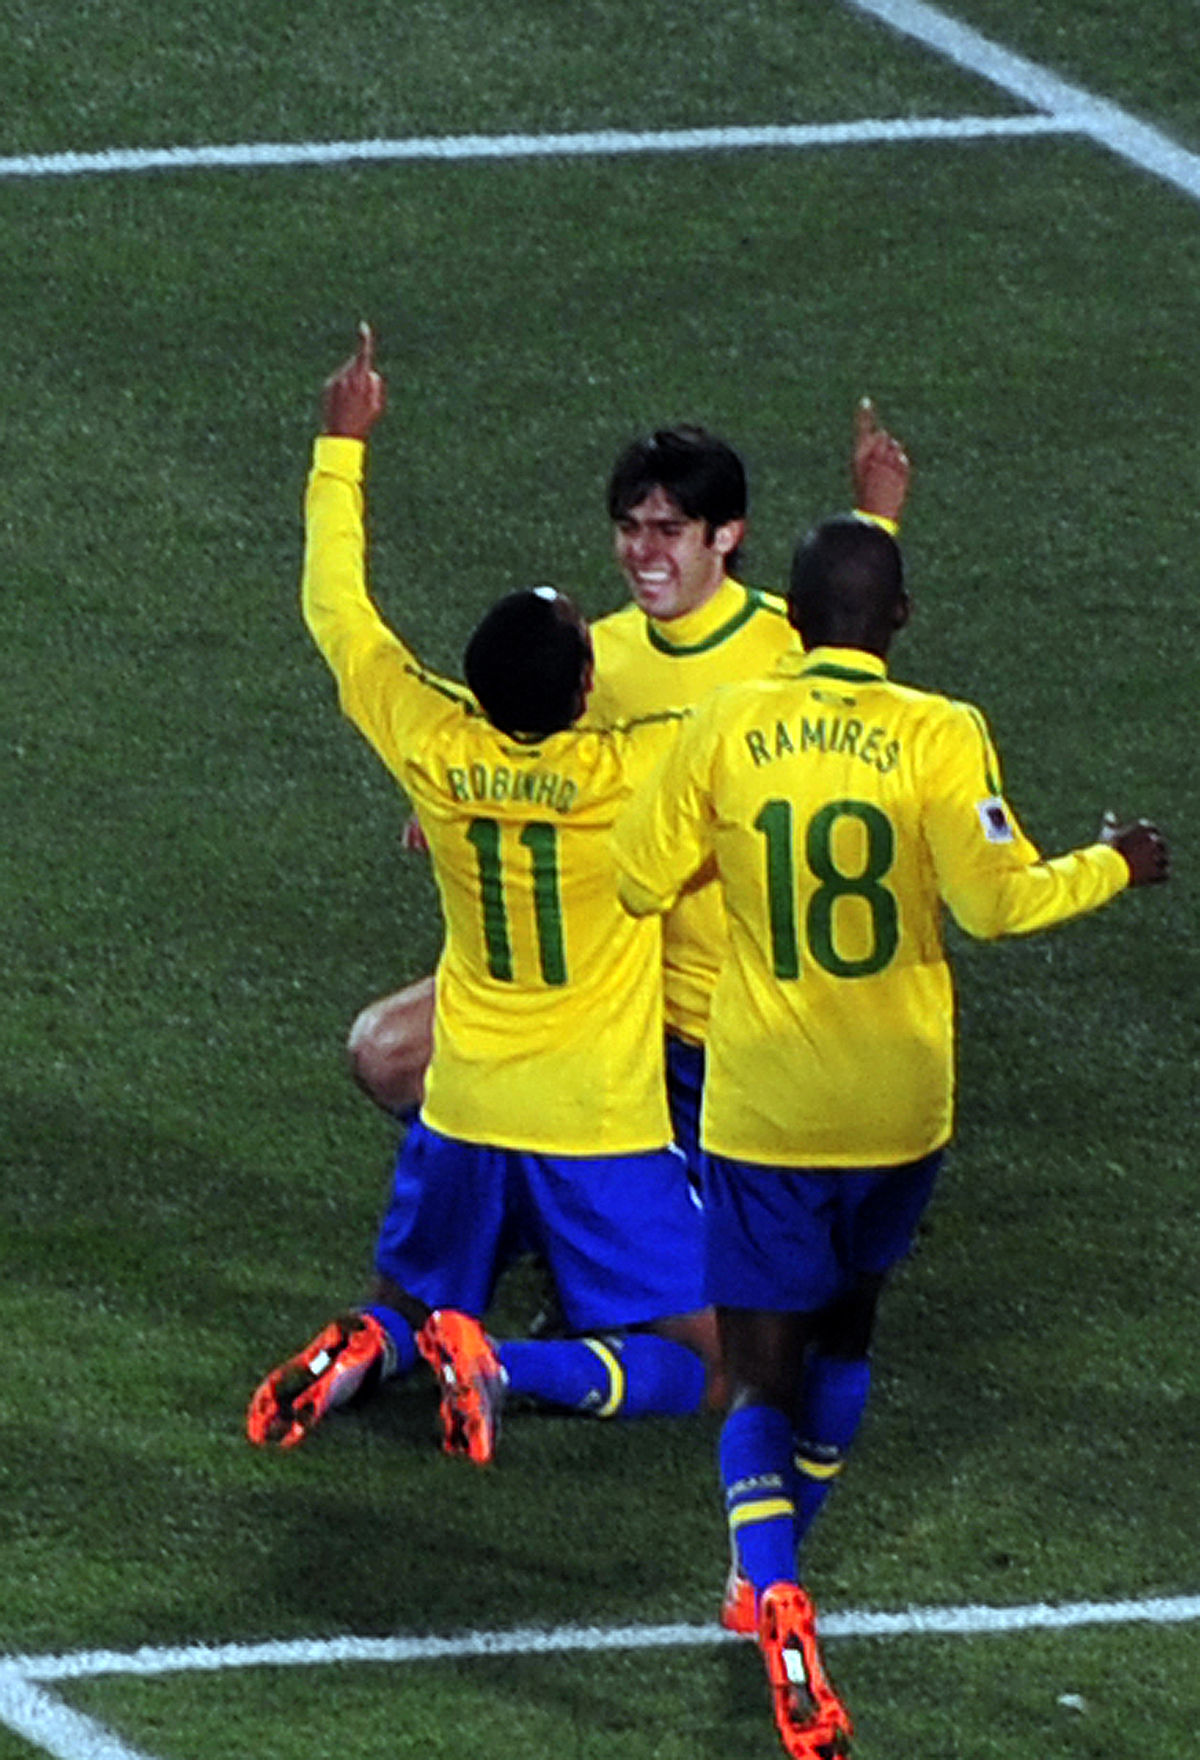 Brazil 2010 World Cup Preview: The Pragmatism Of The Selecao